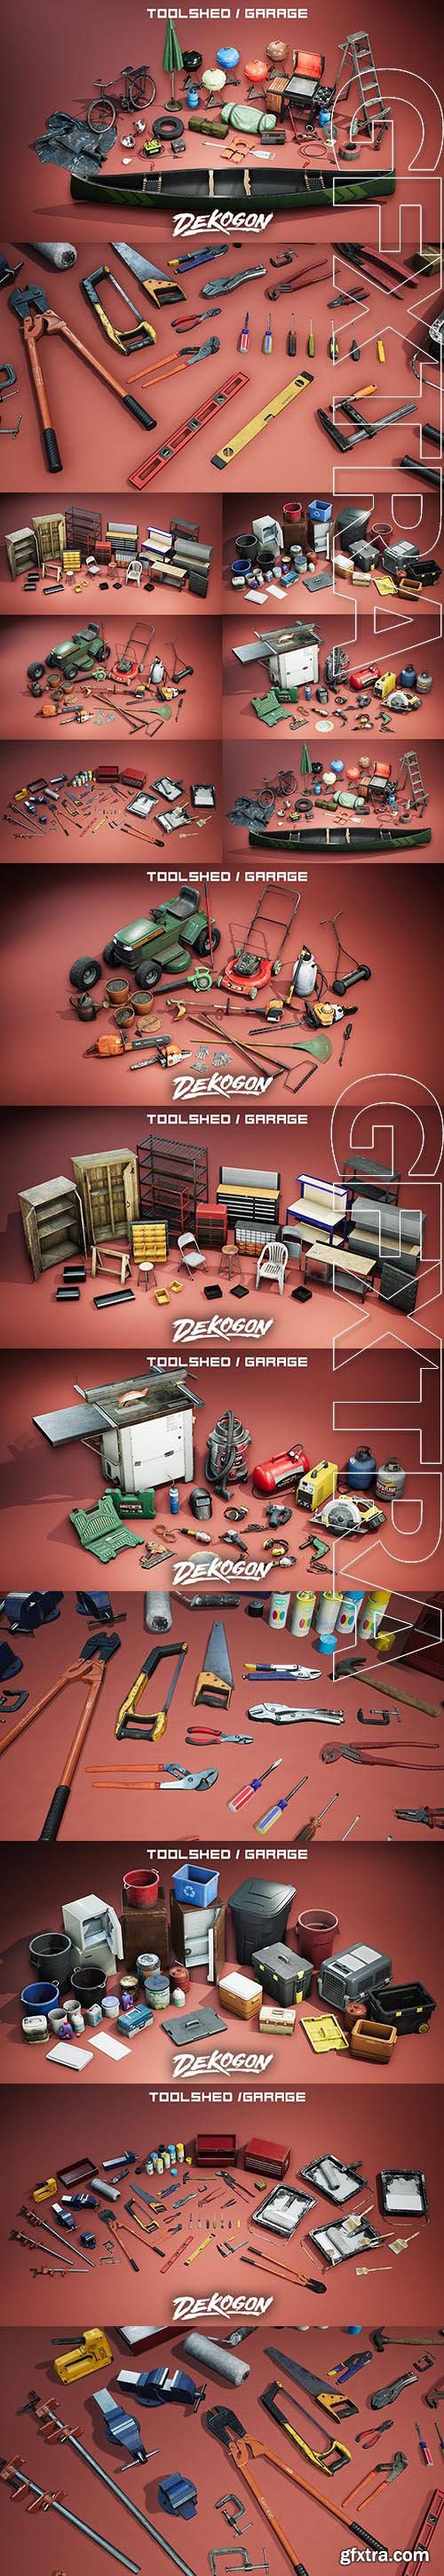 Cubebrush - Toolshed / Garage Props COMBO PACK [UE4+Raw]